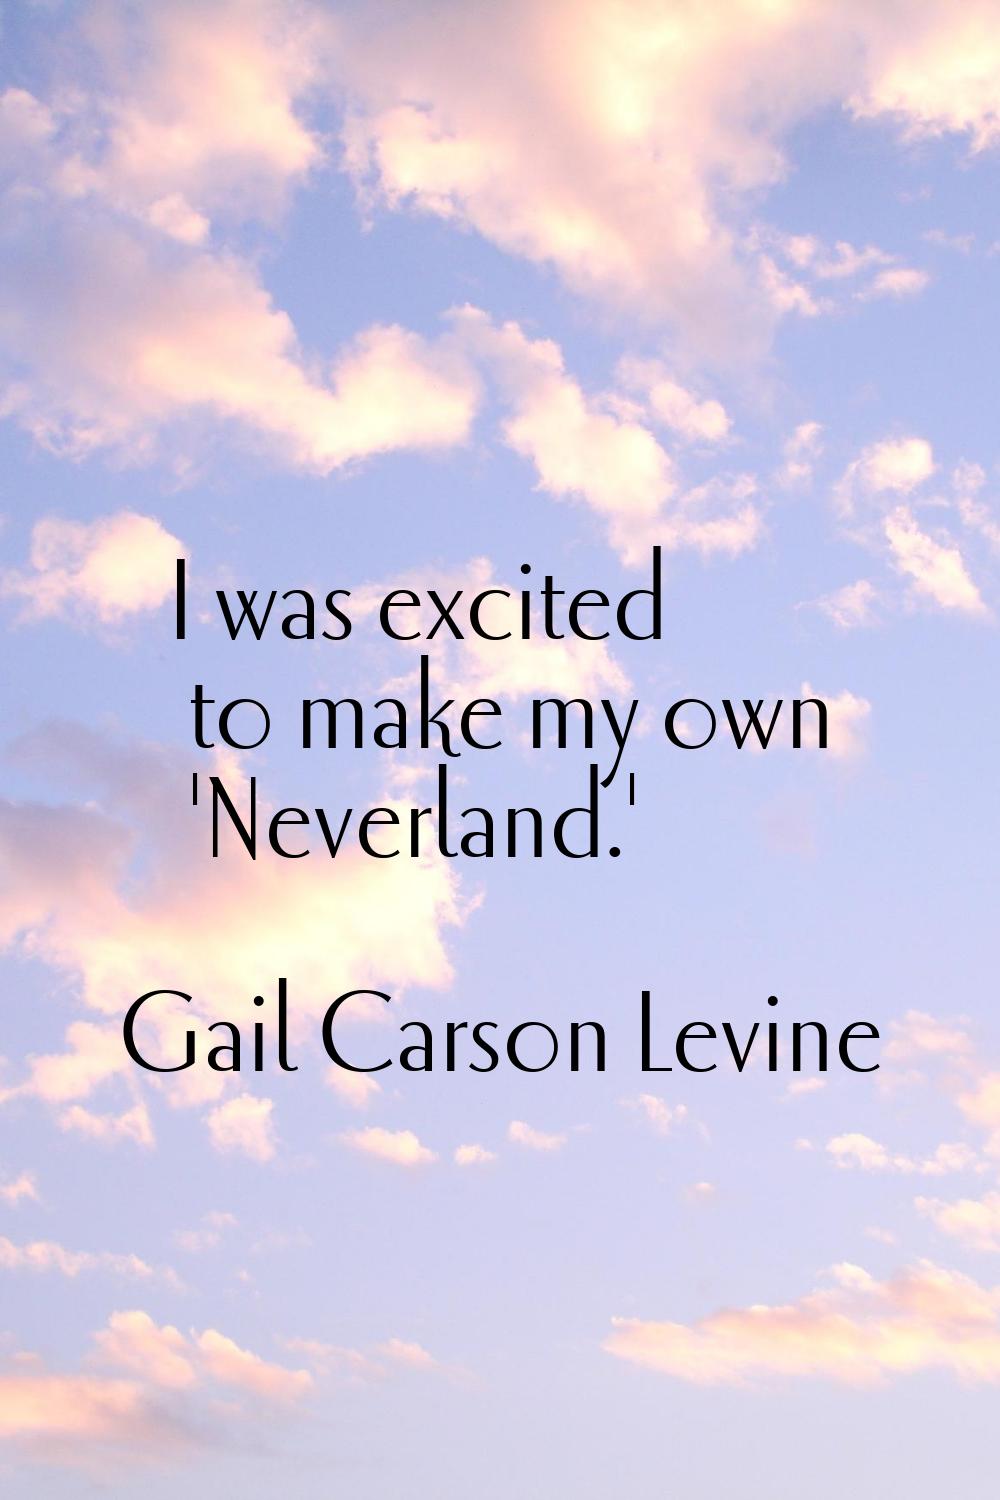 I was excited to make my own 'Neverland.'